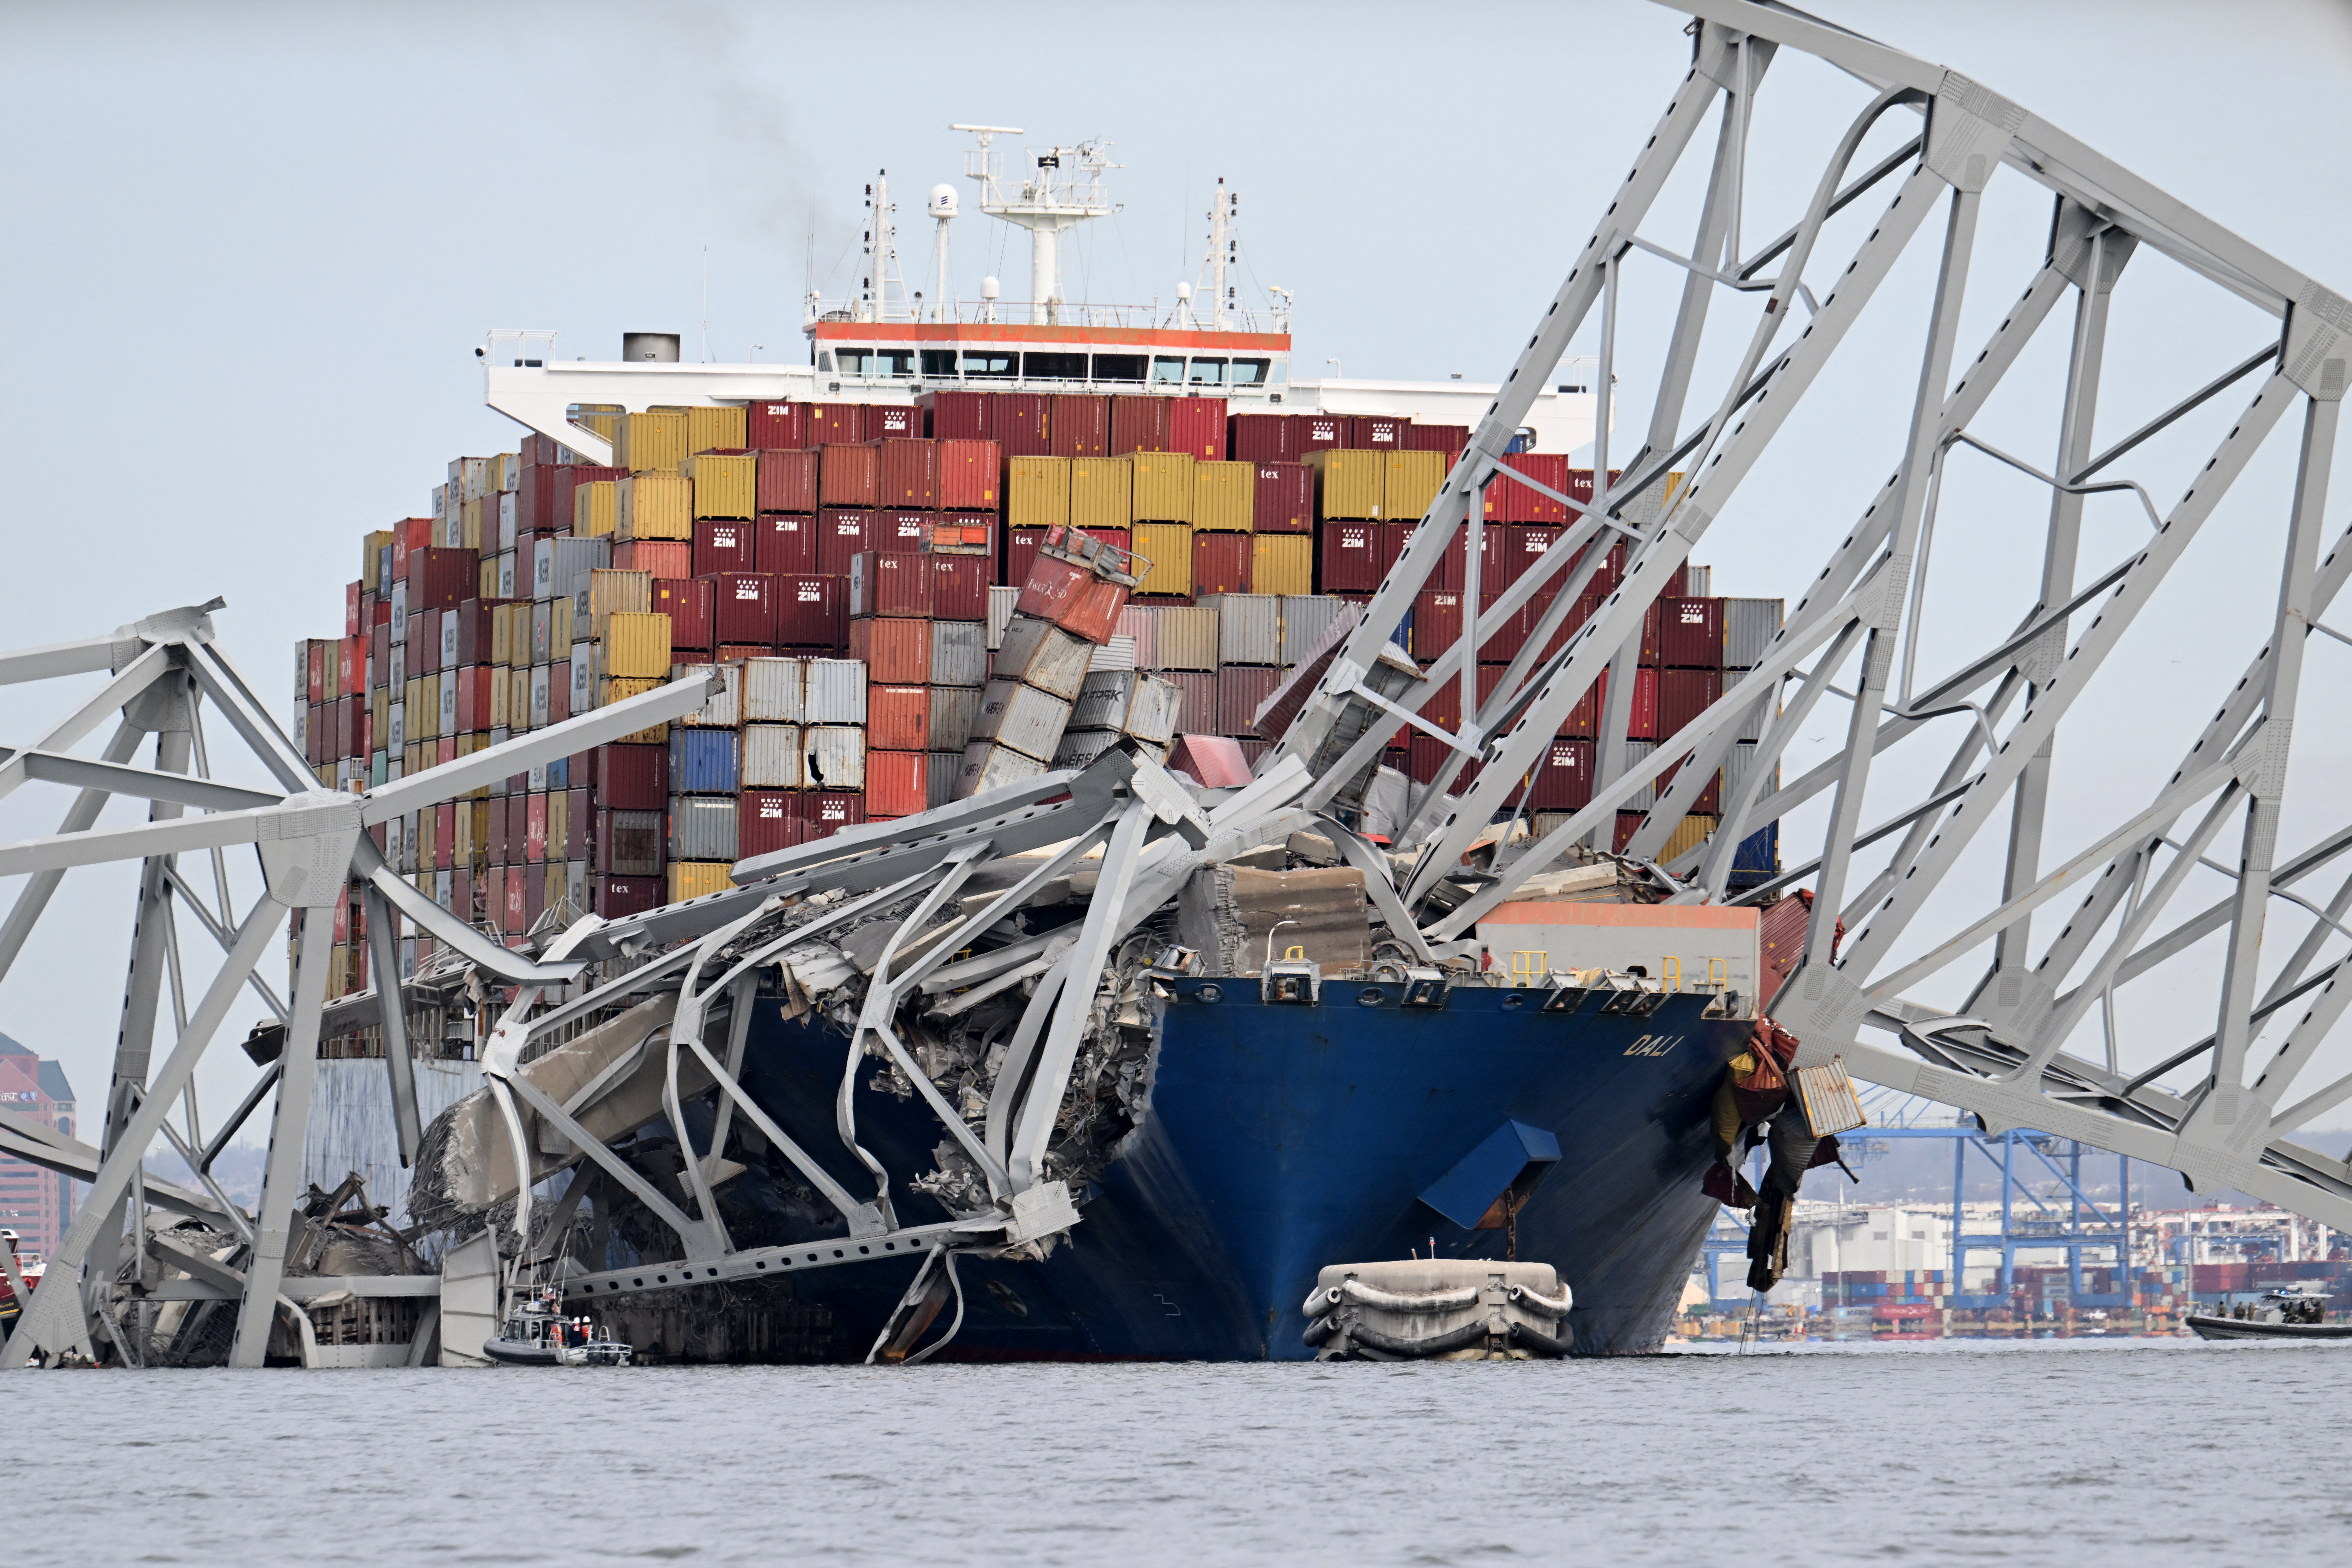 In Photos: Francis Scott Key Bridge collapses after being struck by container ship